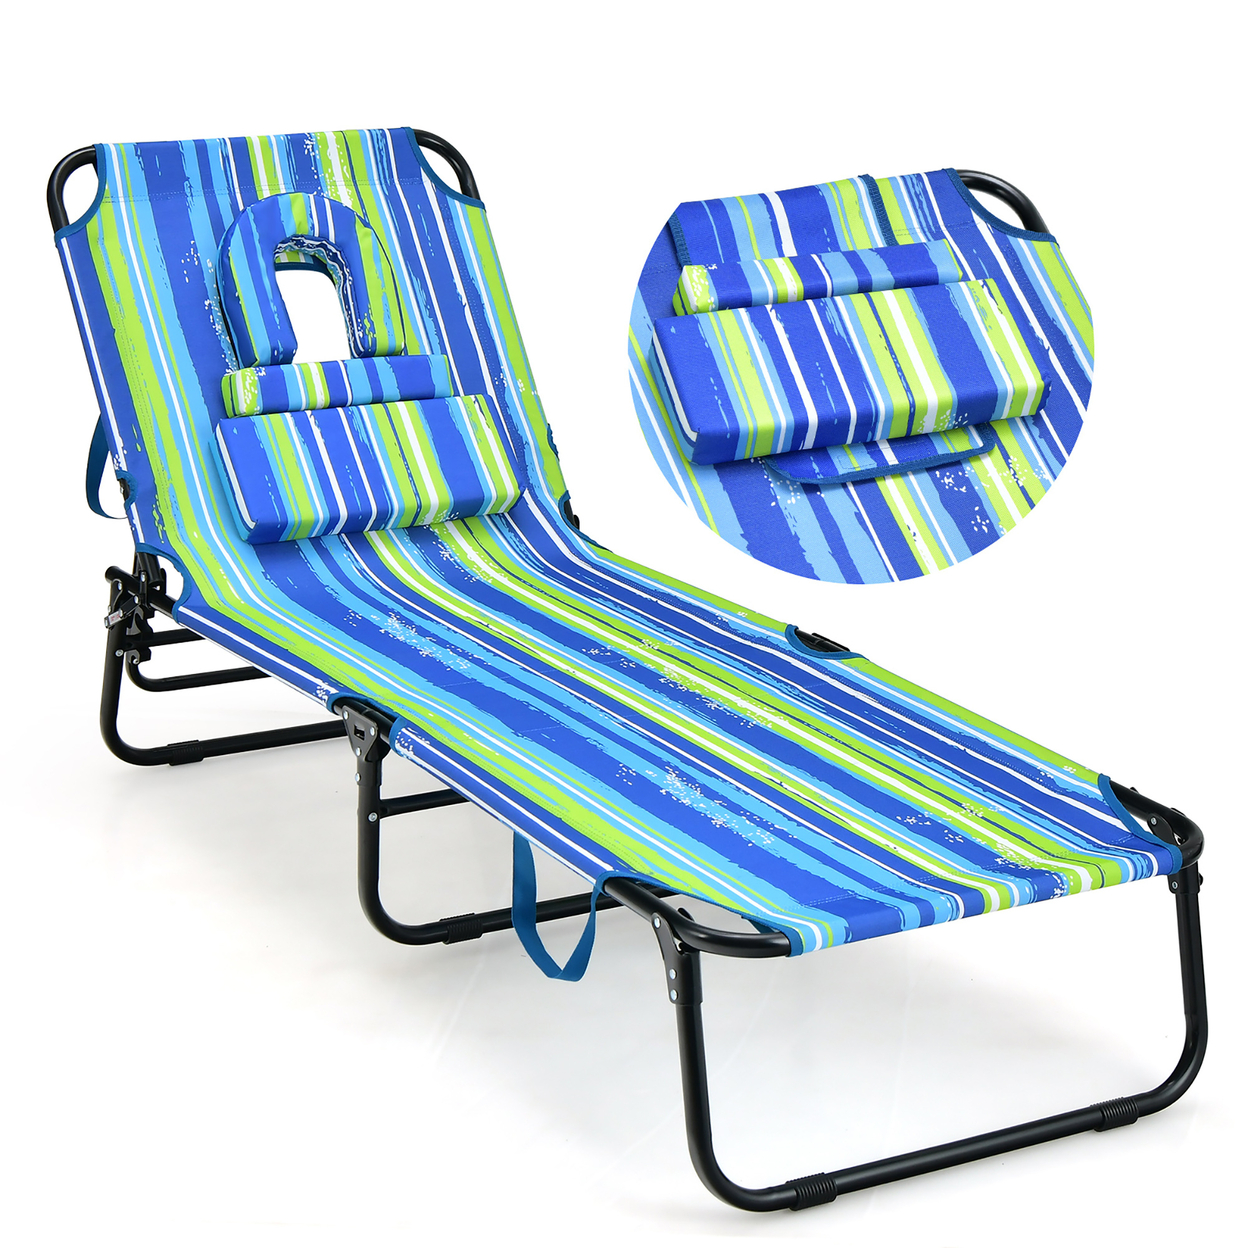 5-Position Lounge Chair Adjustable Beach Chaise W/ Face Cavity & Pillows - Blue,Green,Black